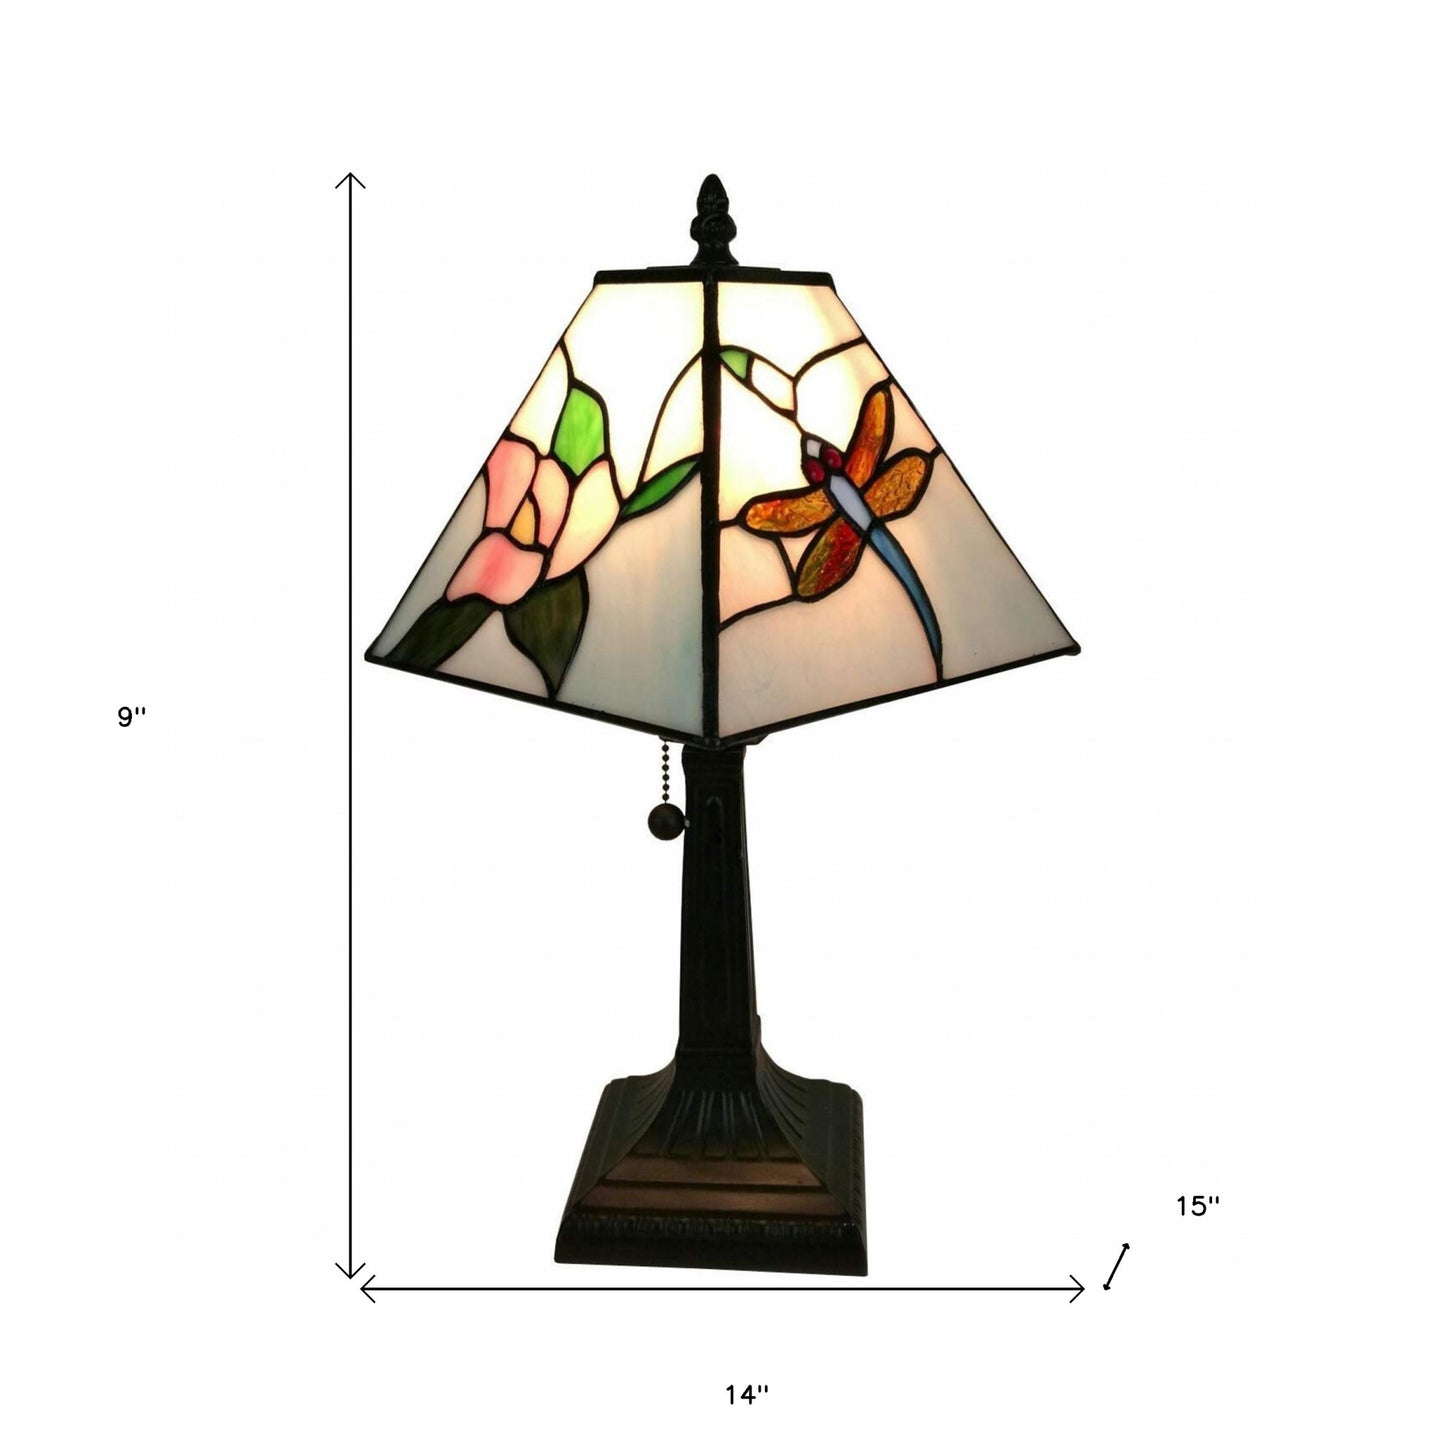 15" Tiffany Style Floral Dragonflies Table Lamp